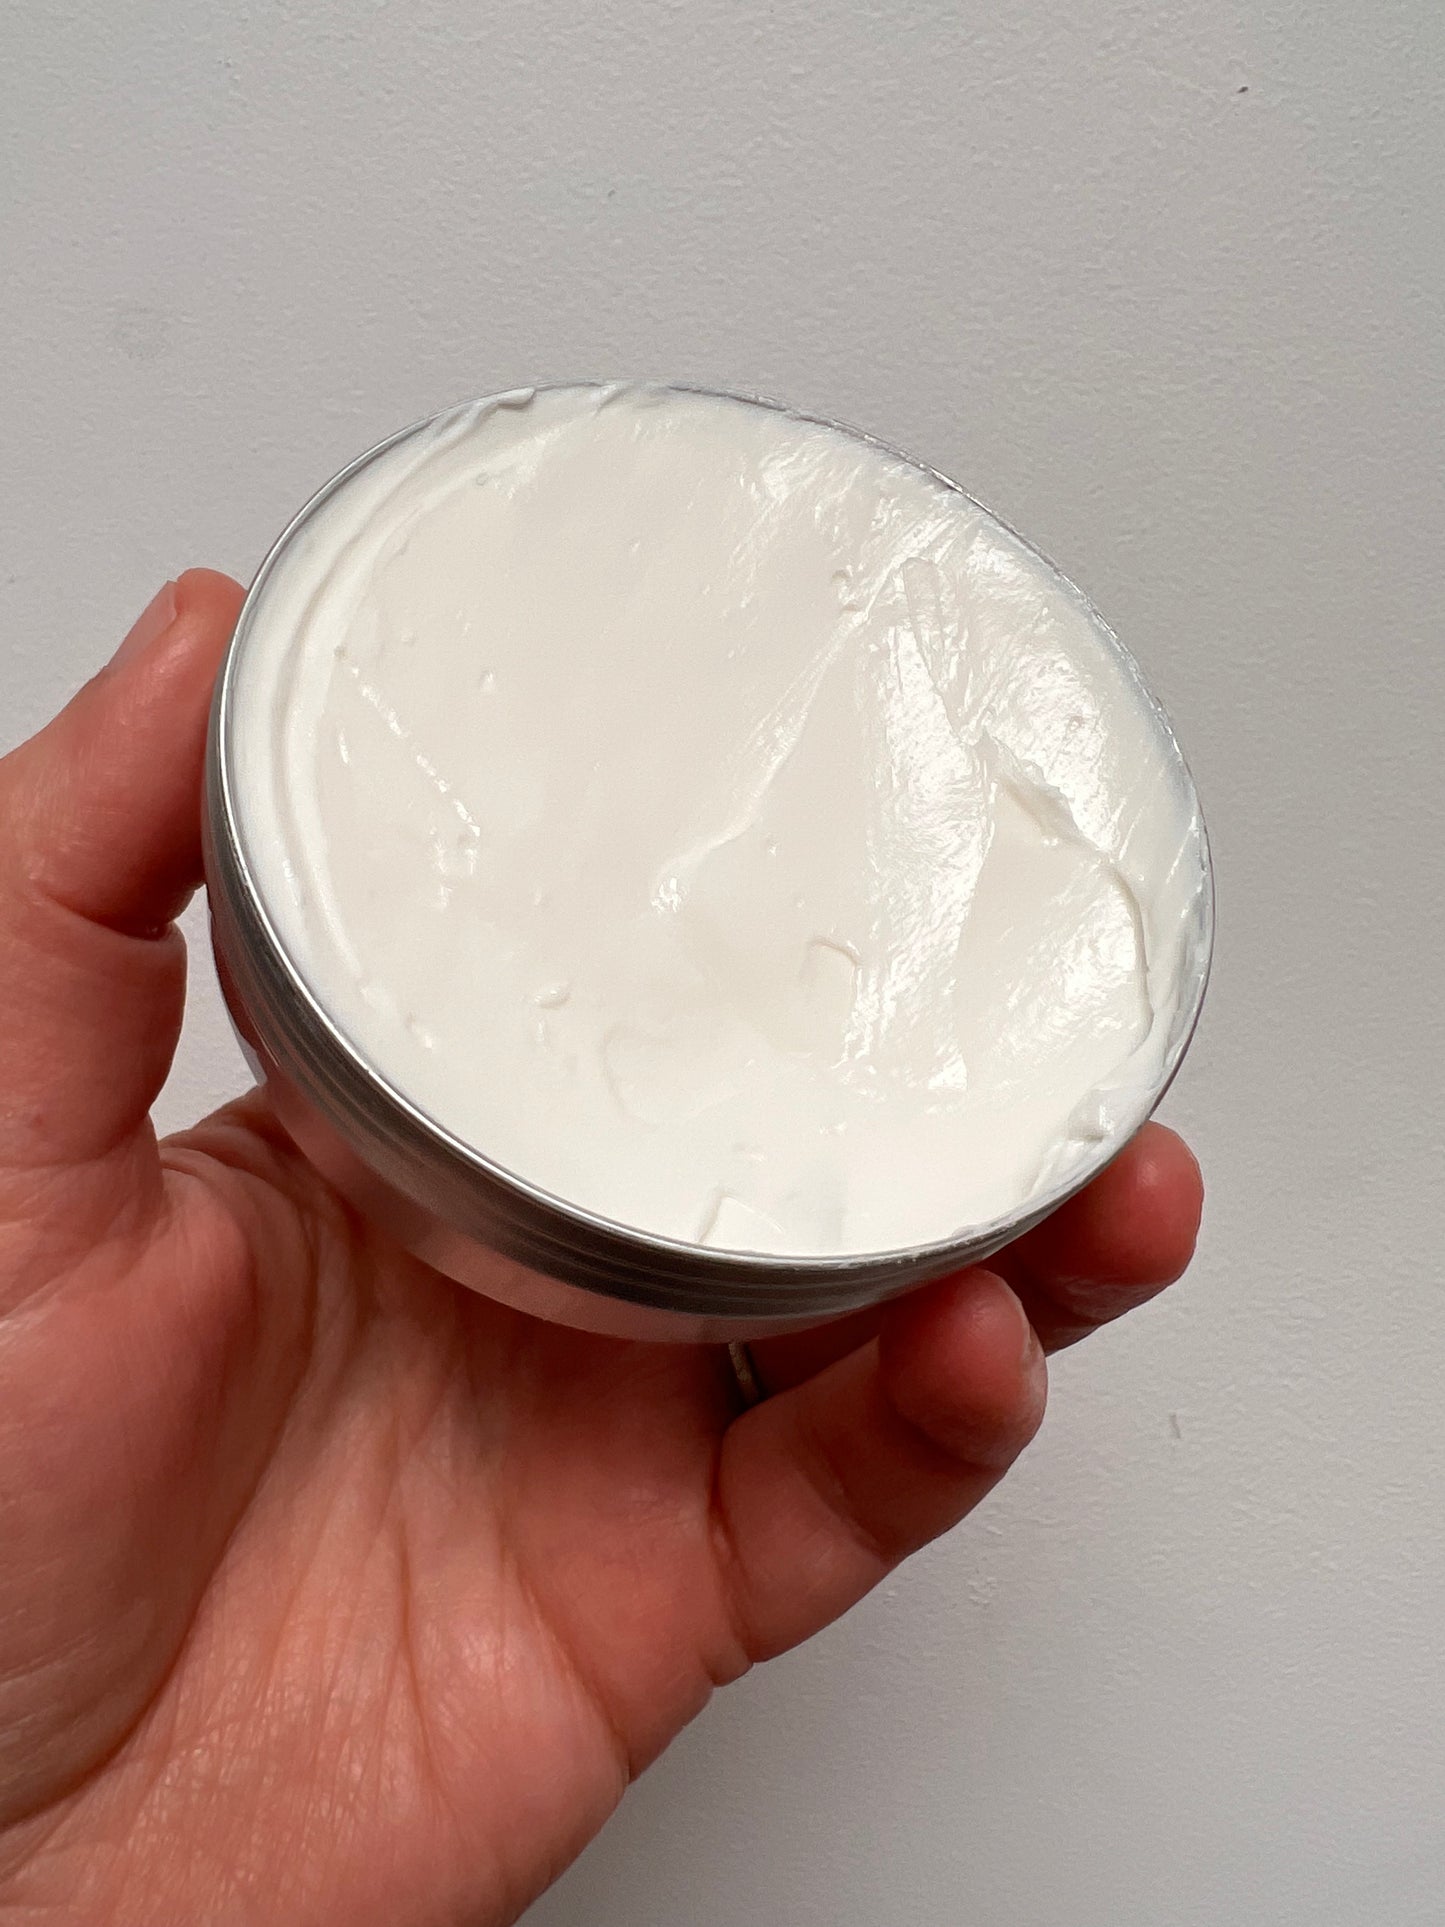 Lid off the tin showing the facial cream which is thick and white.